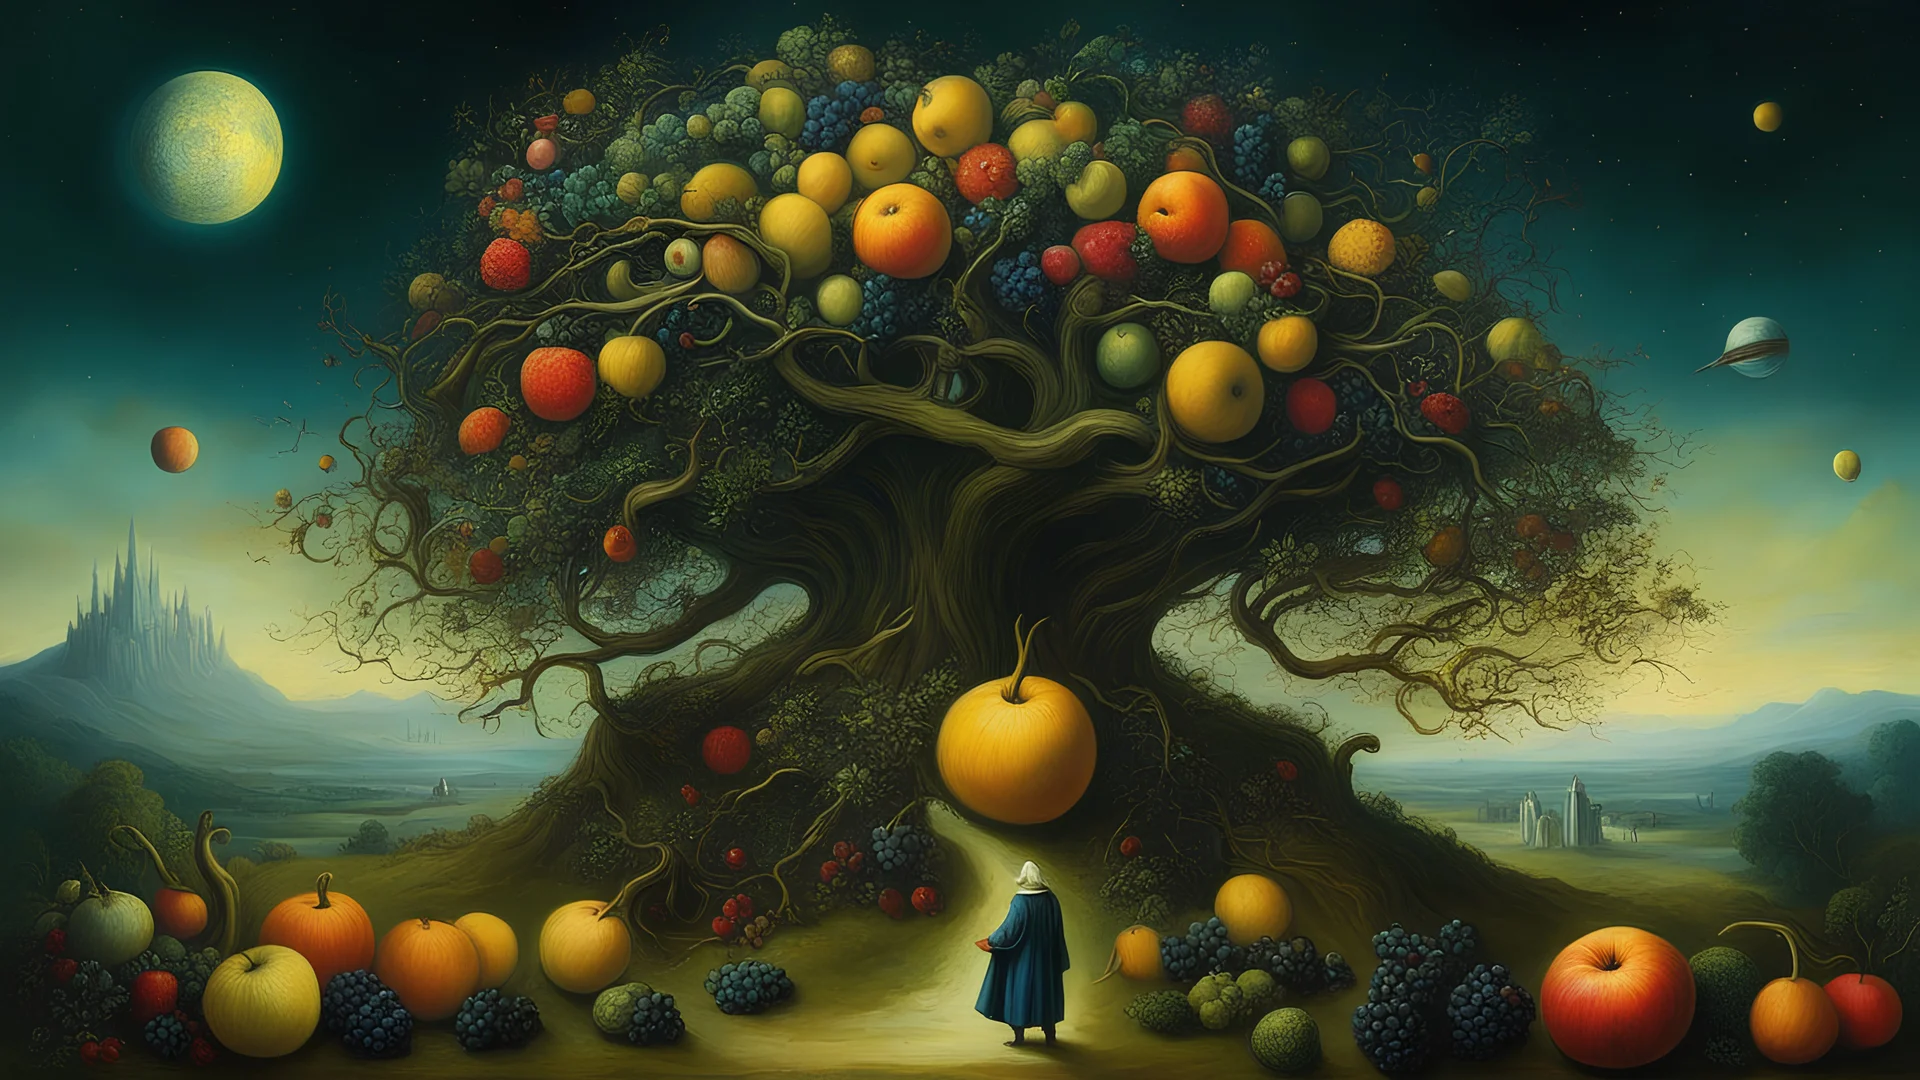 Fruit Of The Poisoned Tree || surrealism, magic realism, in the styles of Seb McKinnon and Hieronymus Bosch, rococo, cosmic, astral, galactic, entangled, mysterious, Van Gogh